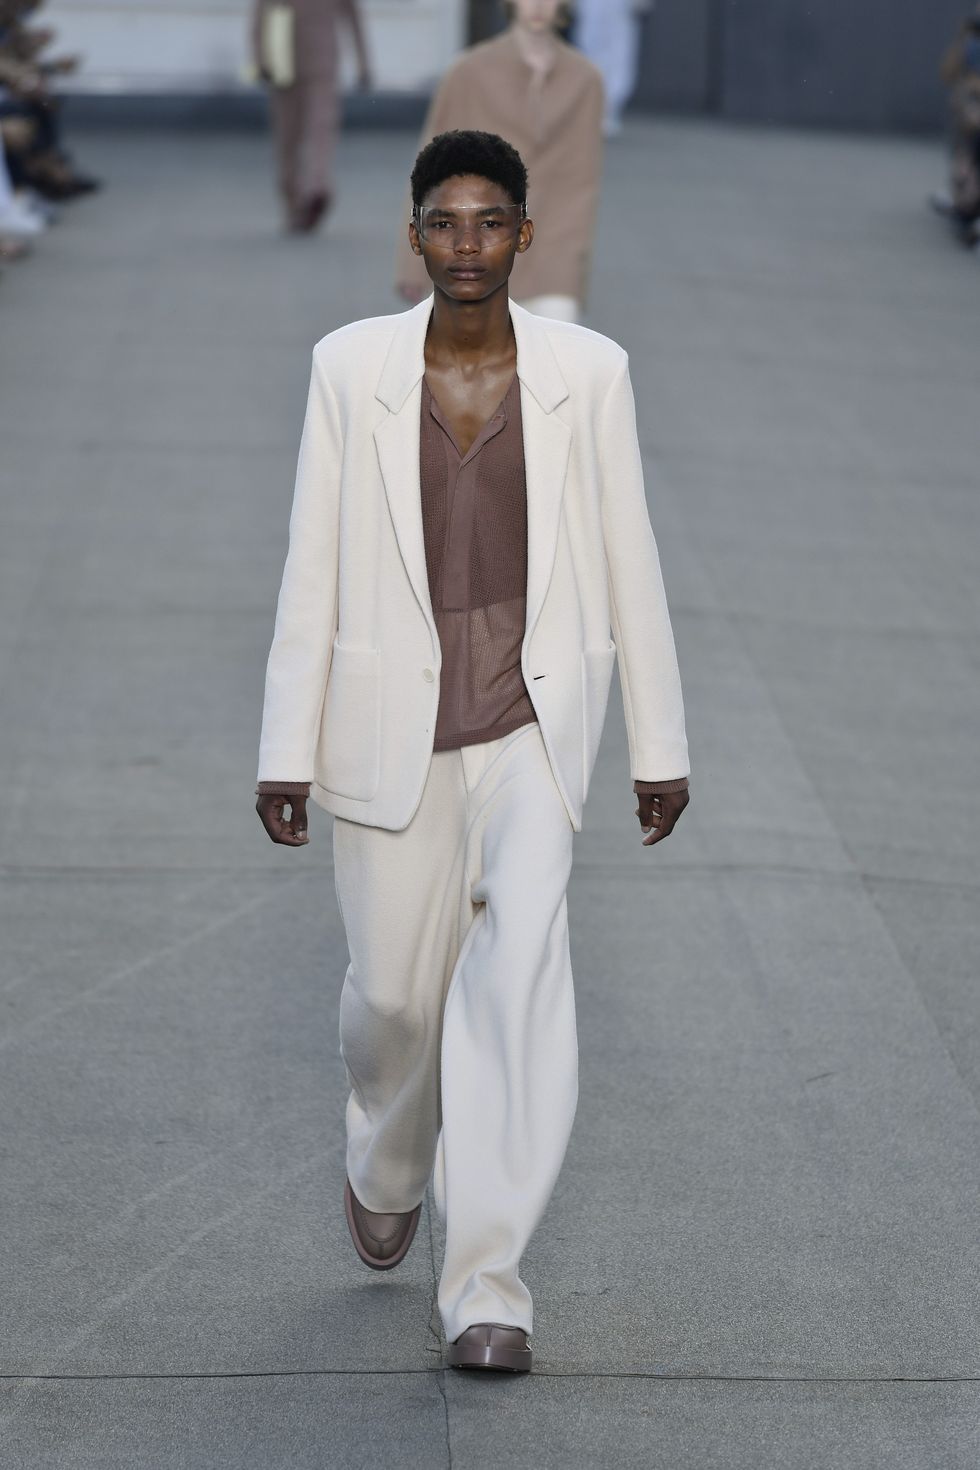 milan, italy june 20 a model walks the runway during the zegna ready to wear springsummer 2023 fashion show as part of the milan men fashion week on june 20, 2022 in milan, italy photo by victor virgilegamma rapho via getty images